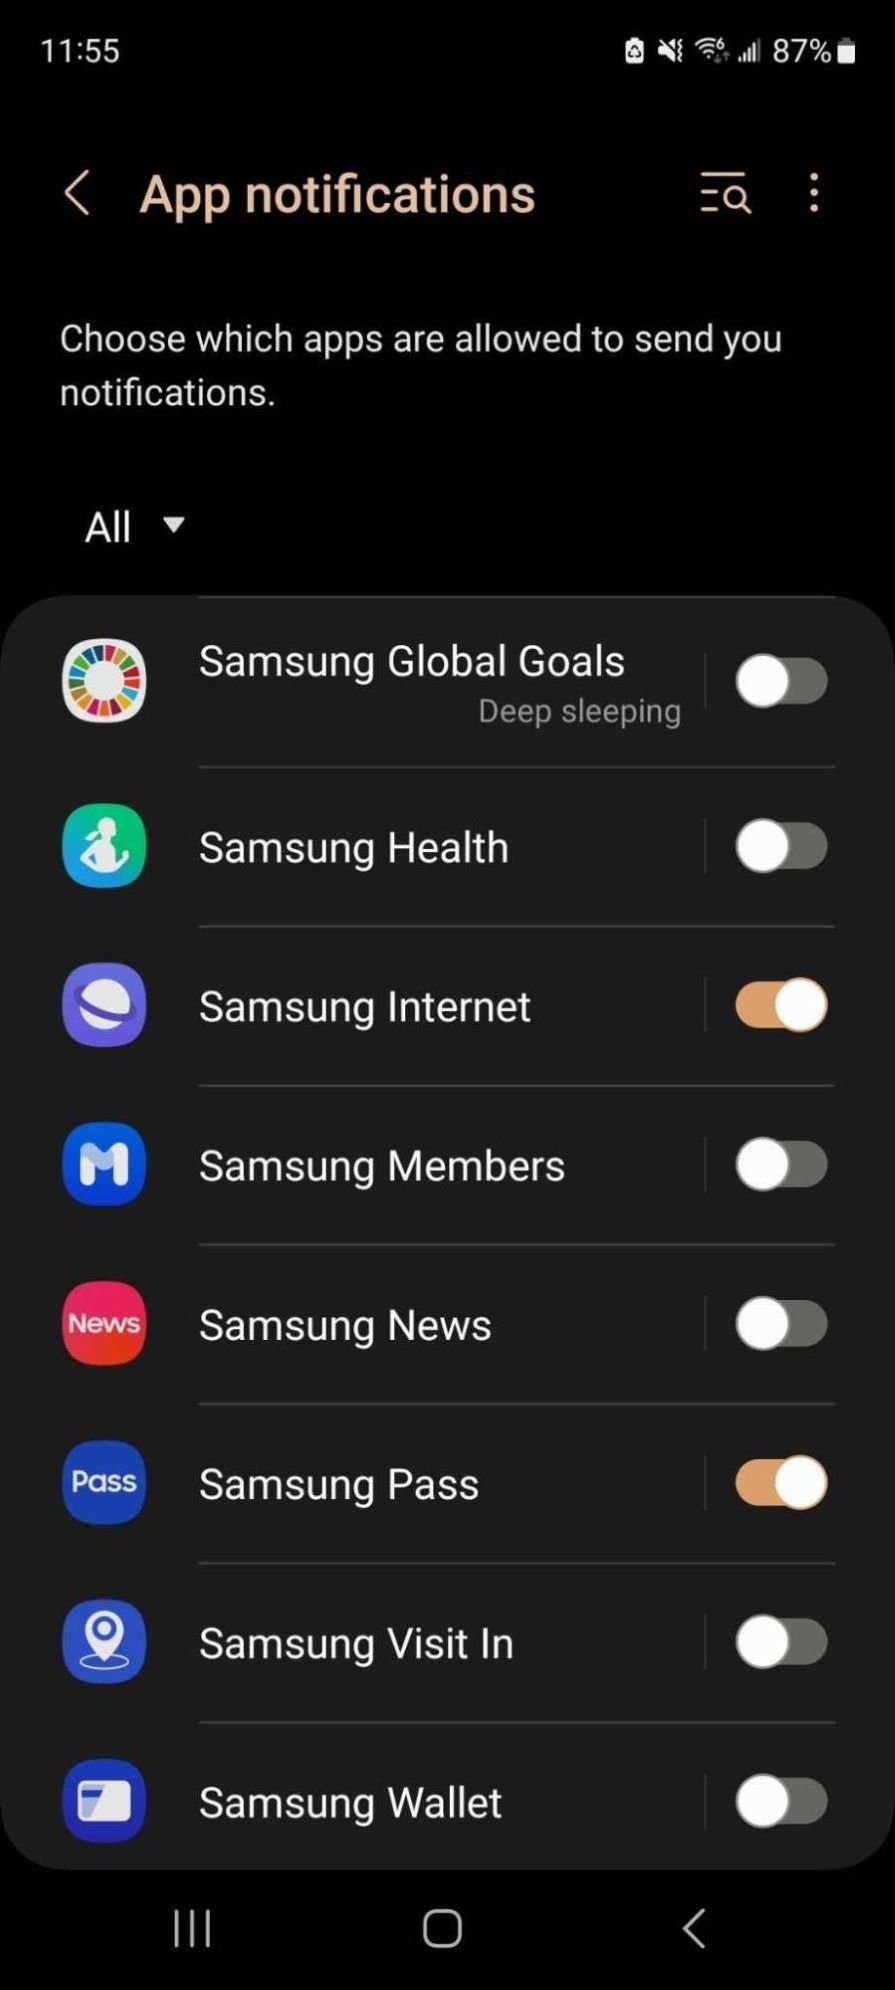 App Notifications on Android